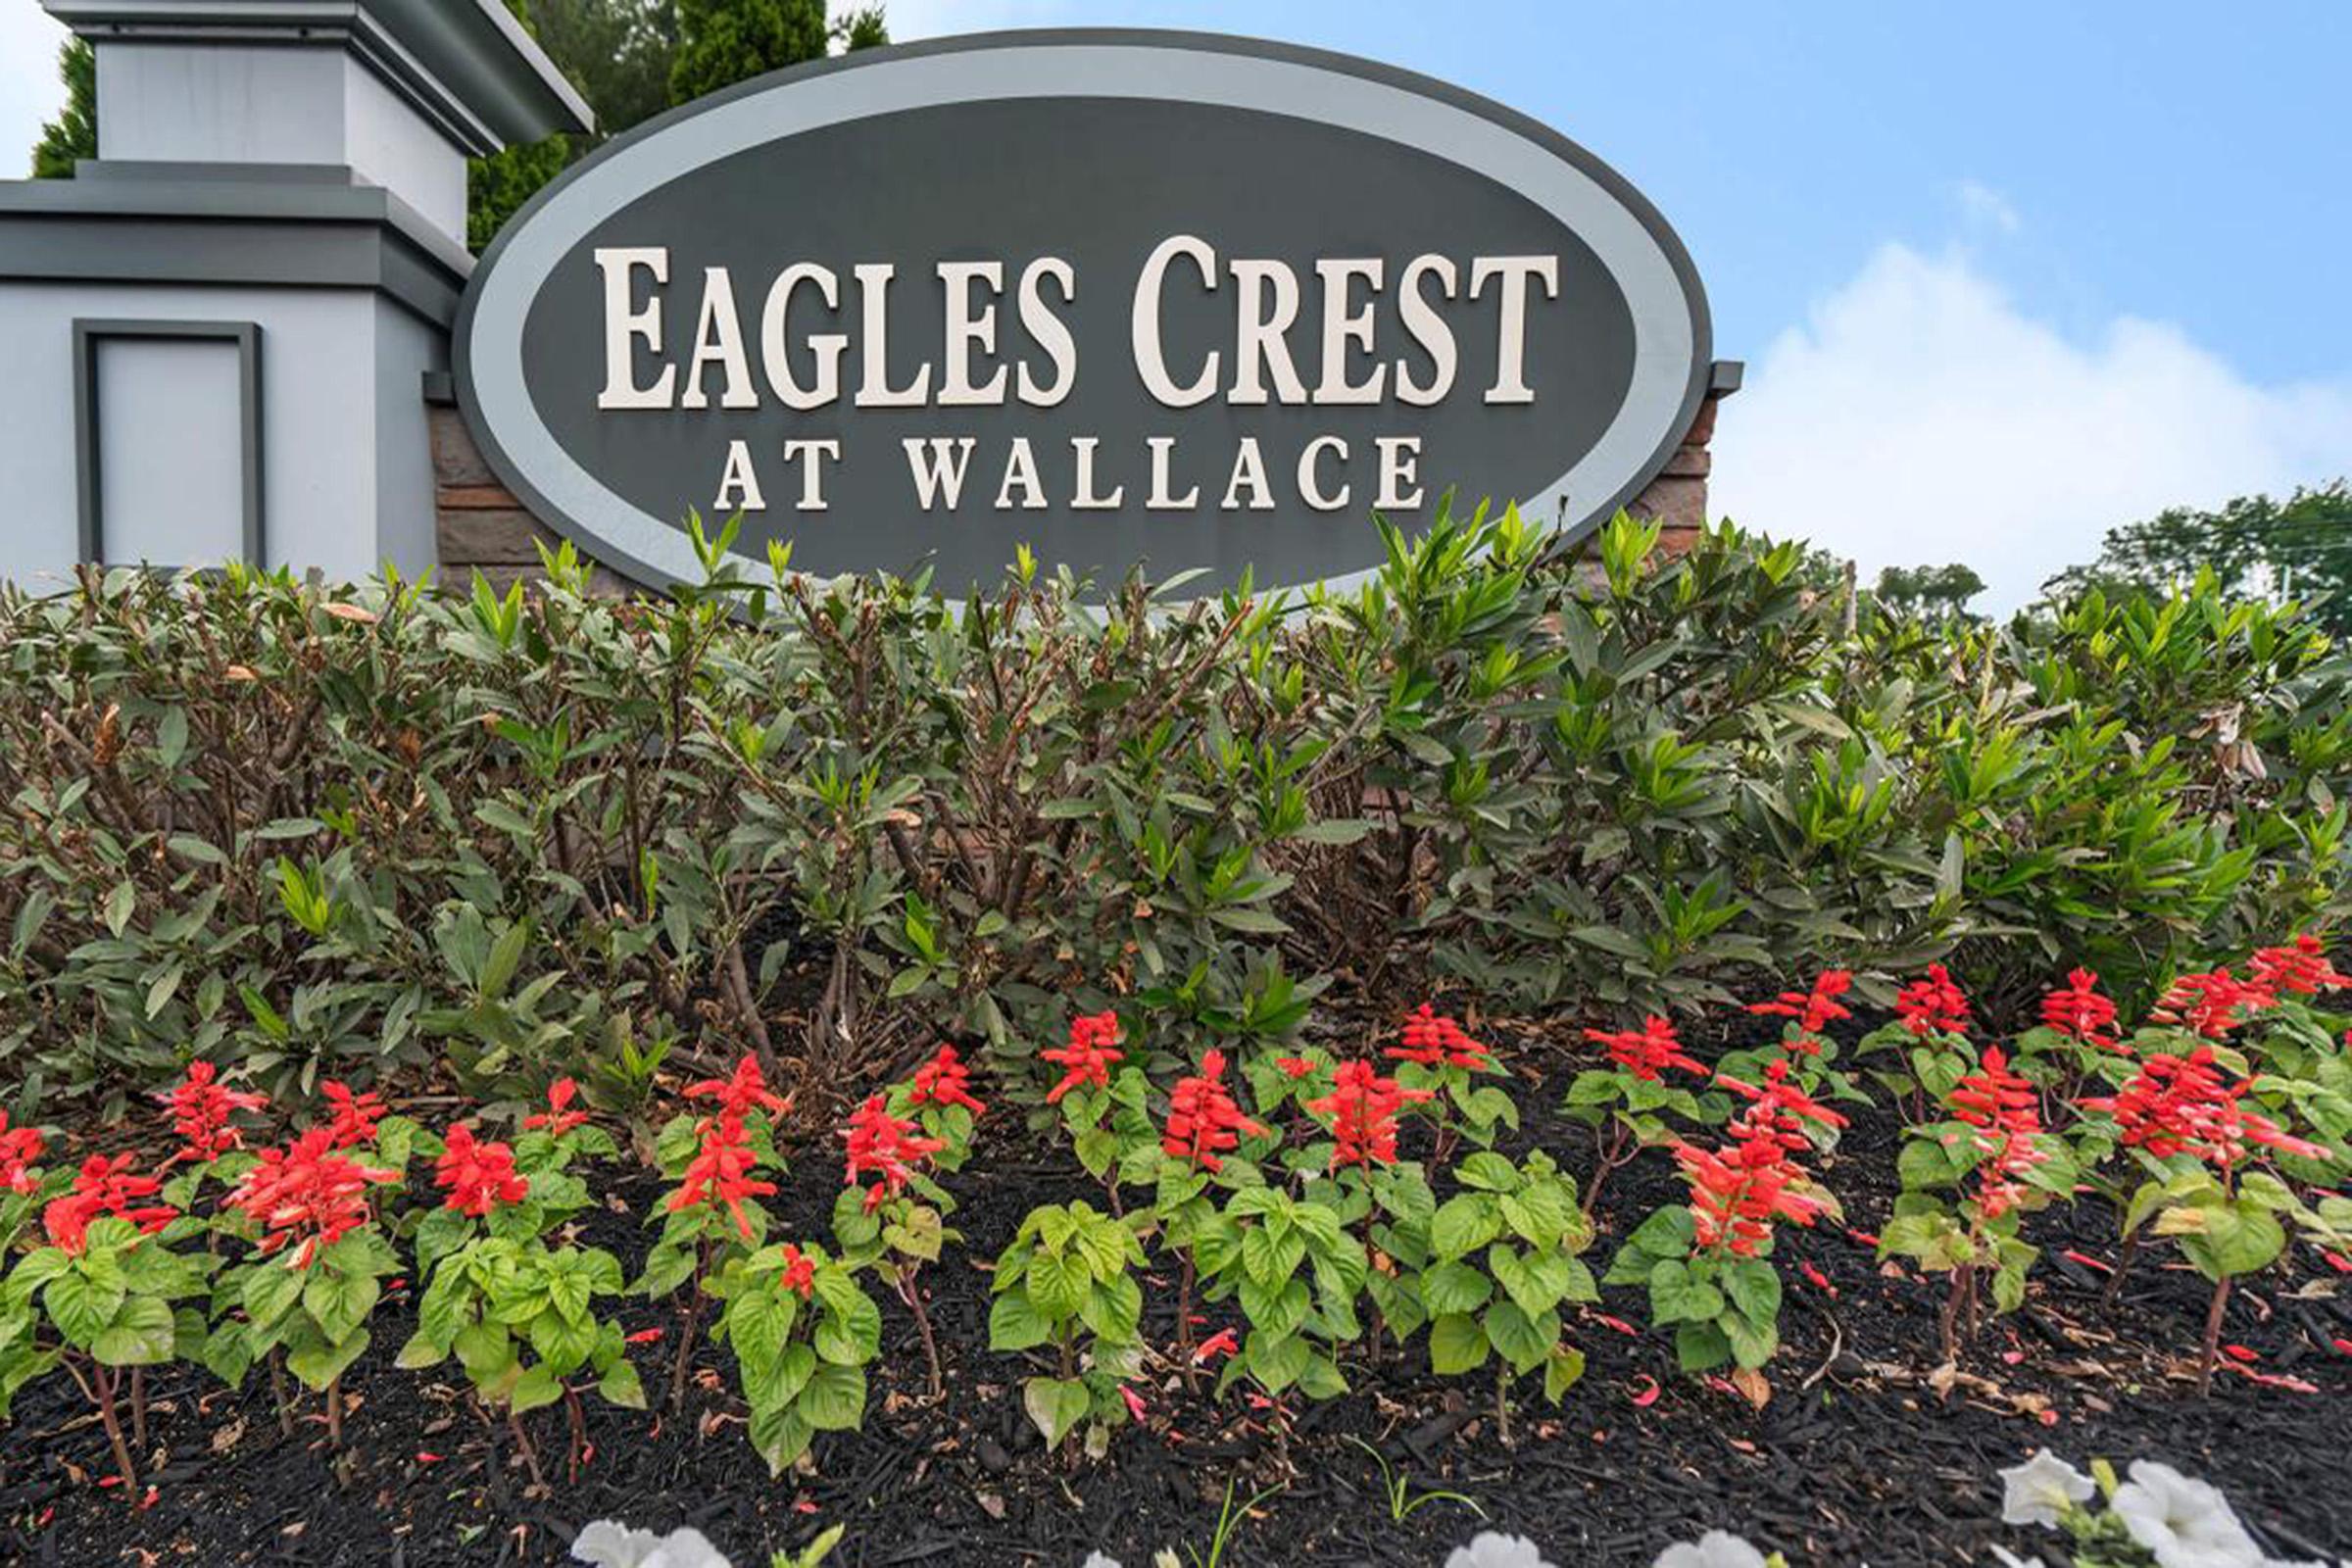 Eagles Crest at Wallace in Clarksville, Tennessee